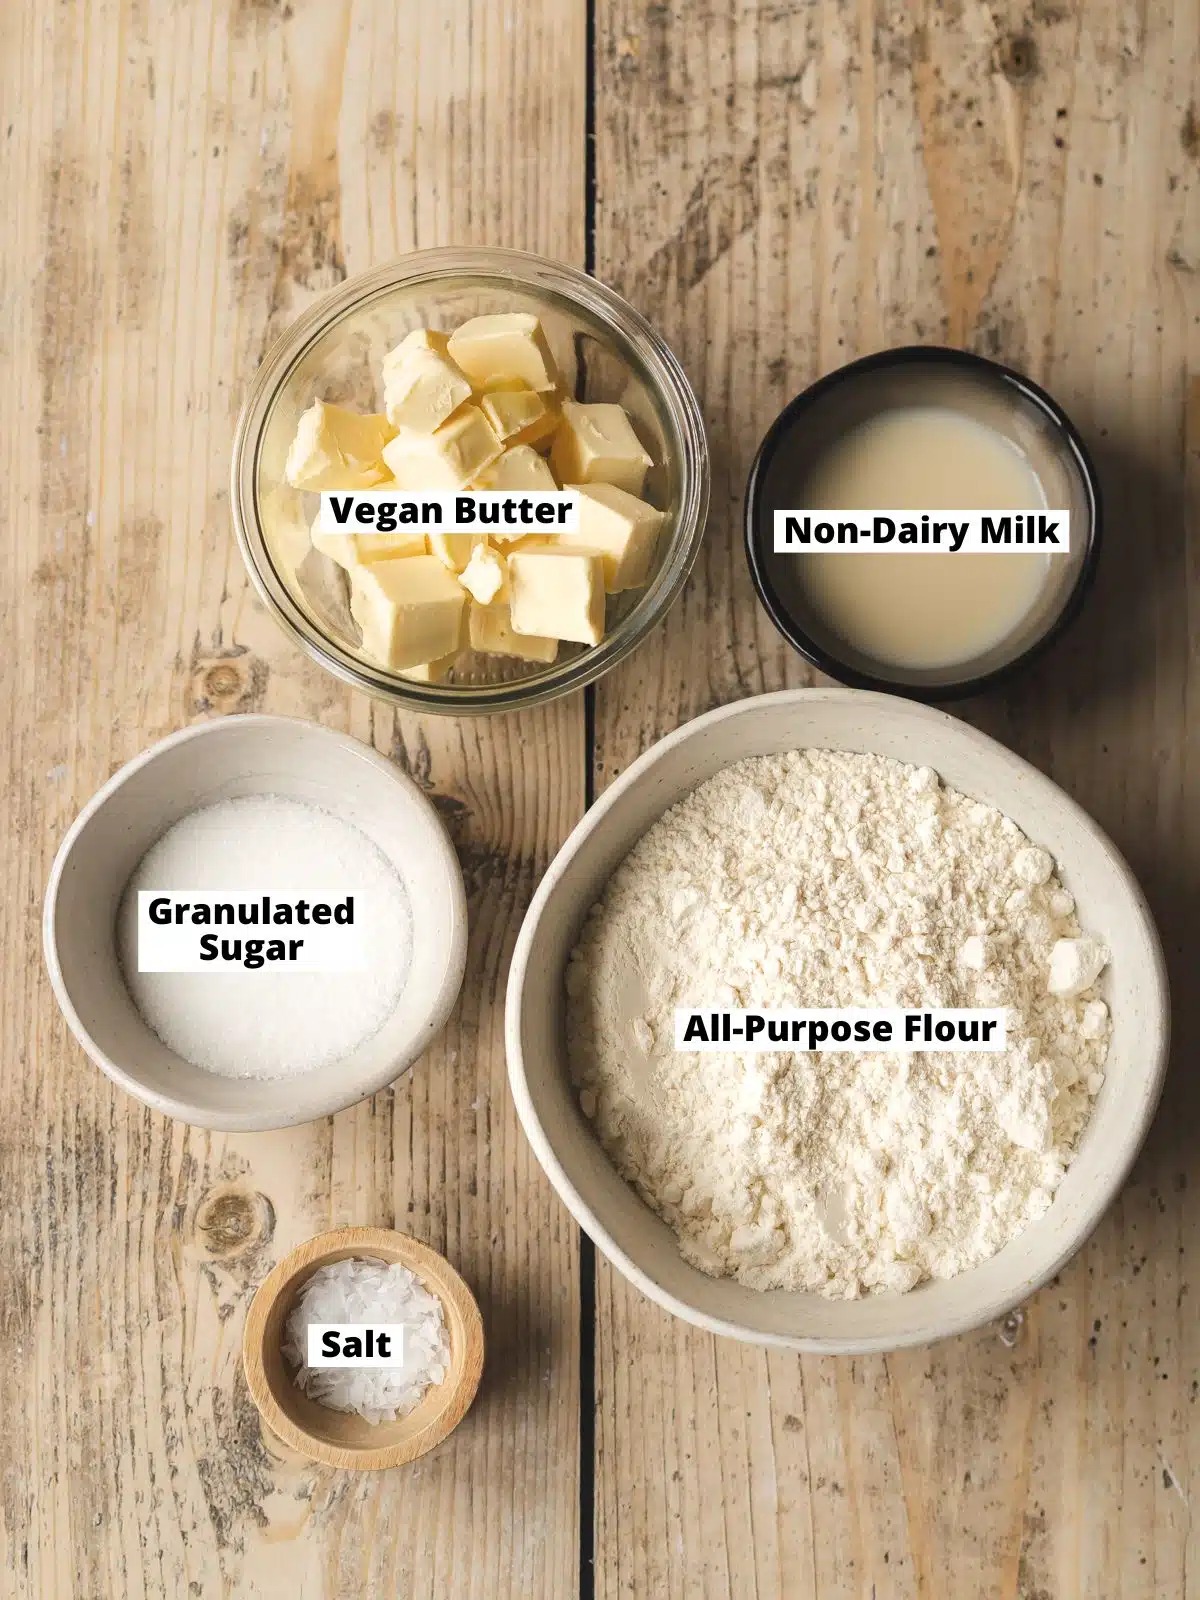 ingredients for vegan tart crust measured out in bowls on a wooden table.